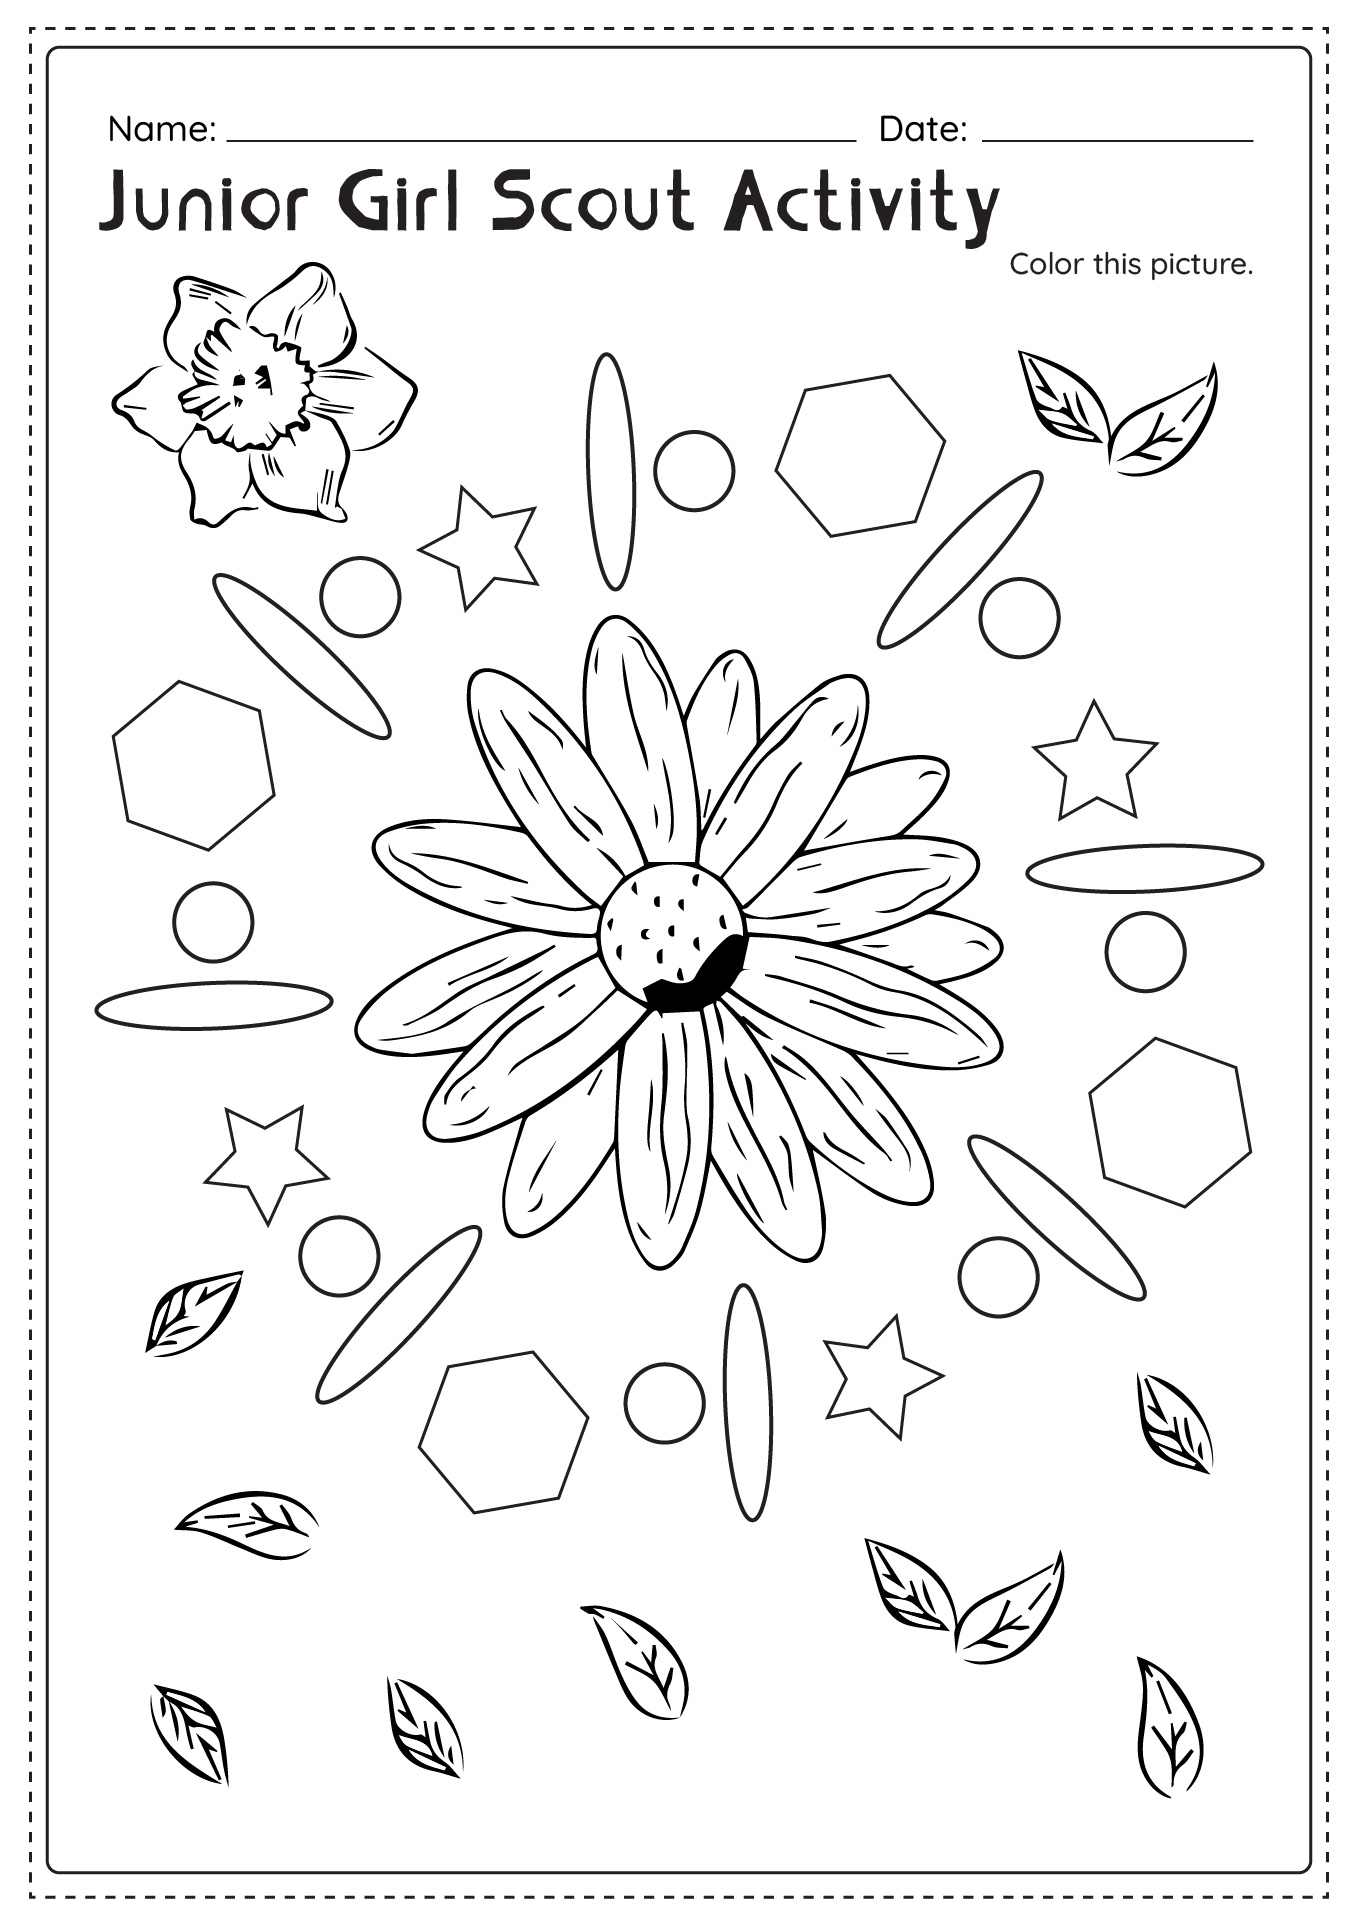 Junior Girl Scout Activity Sheets